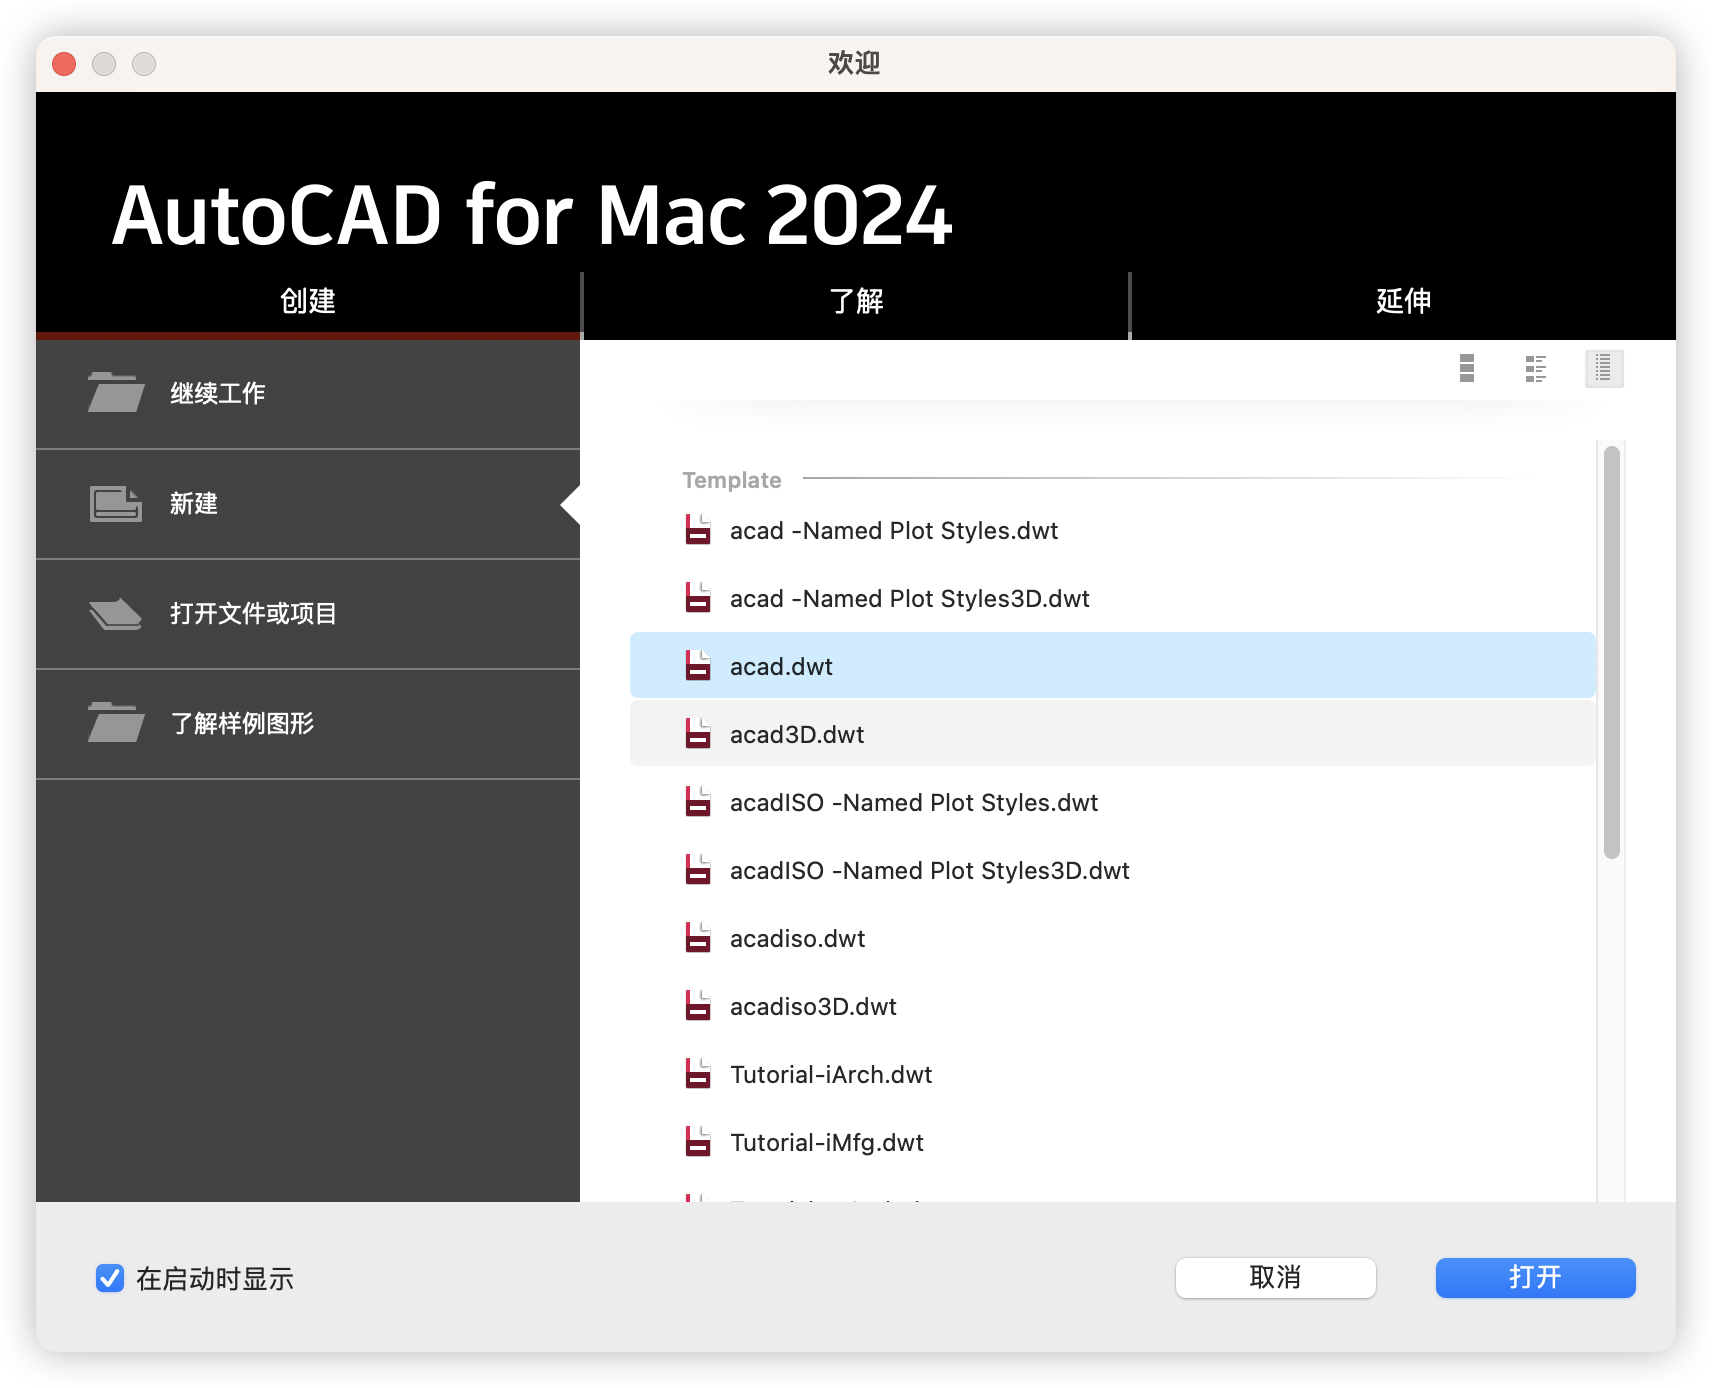 [Mac software] AutoCAD 2024 for Mac (cad2024) v2024.3.61.182 Chinese version supports M1/M2/intel-1